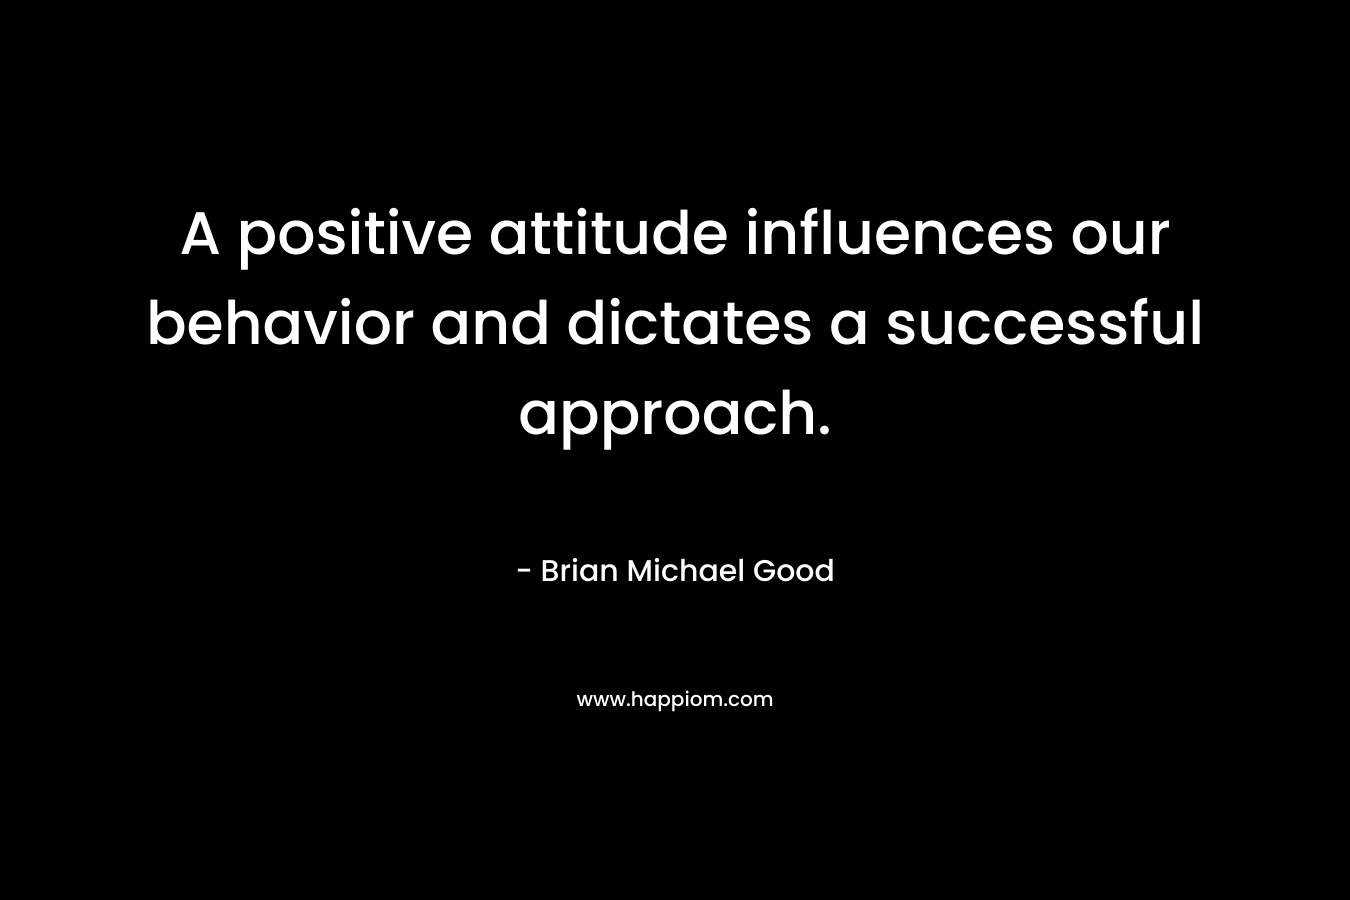 A positive attitude influences our behavior and dictates a successful approach. – Brian Michael Good